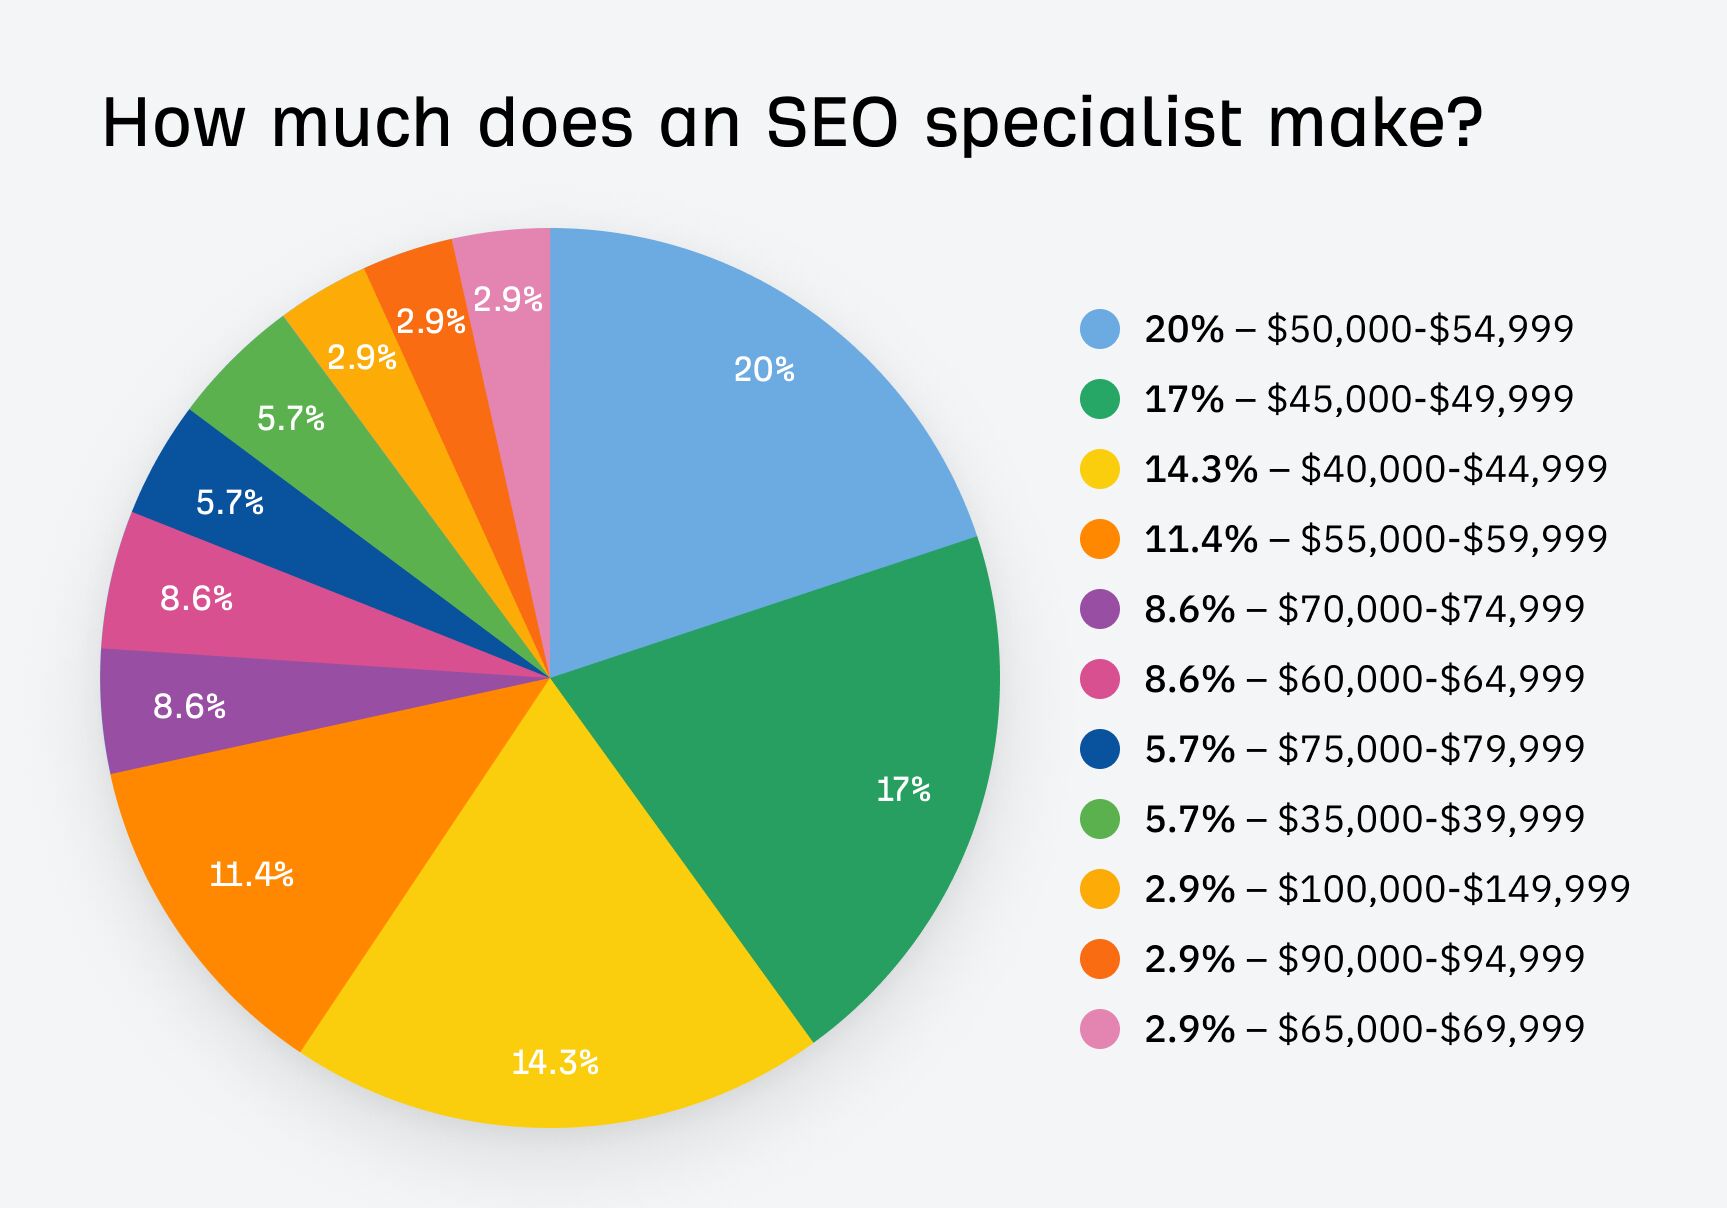 Chart showing how much SEO specialists make